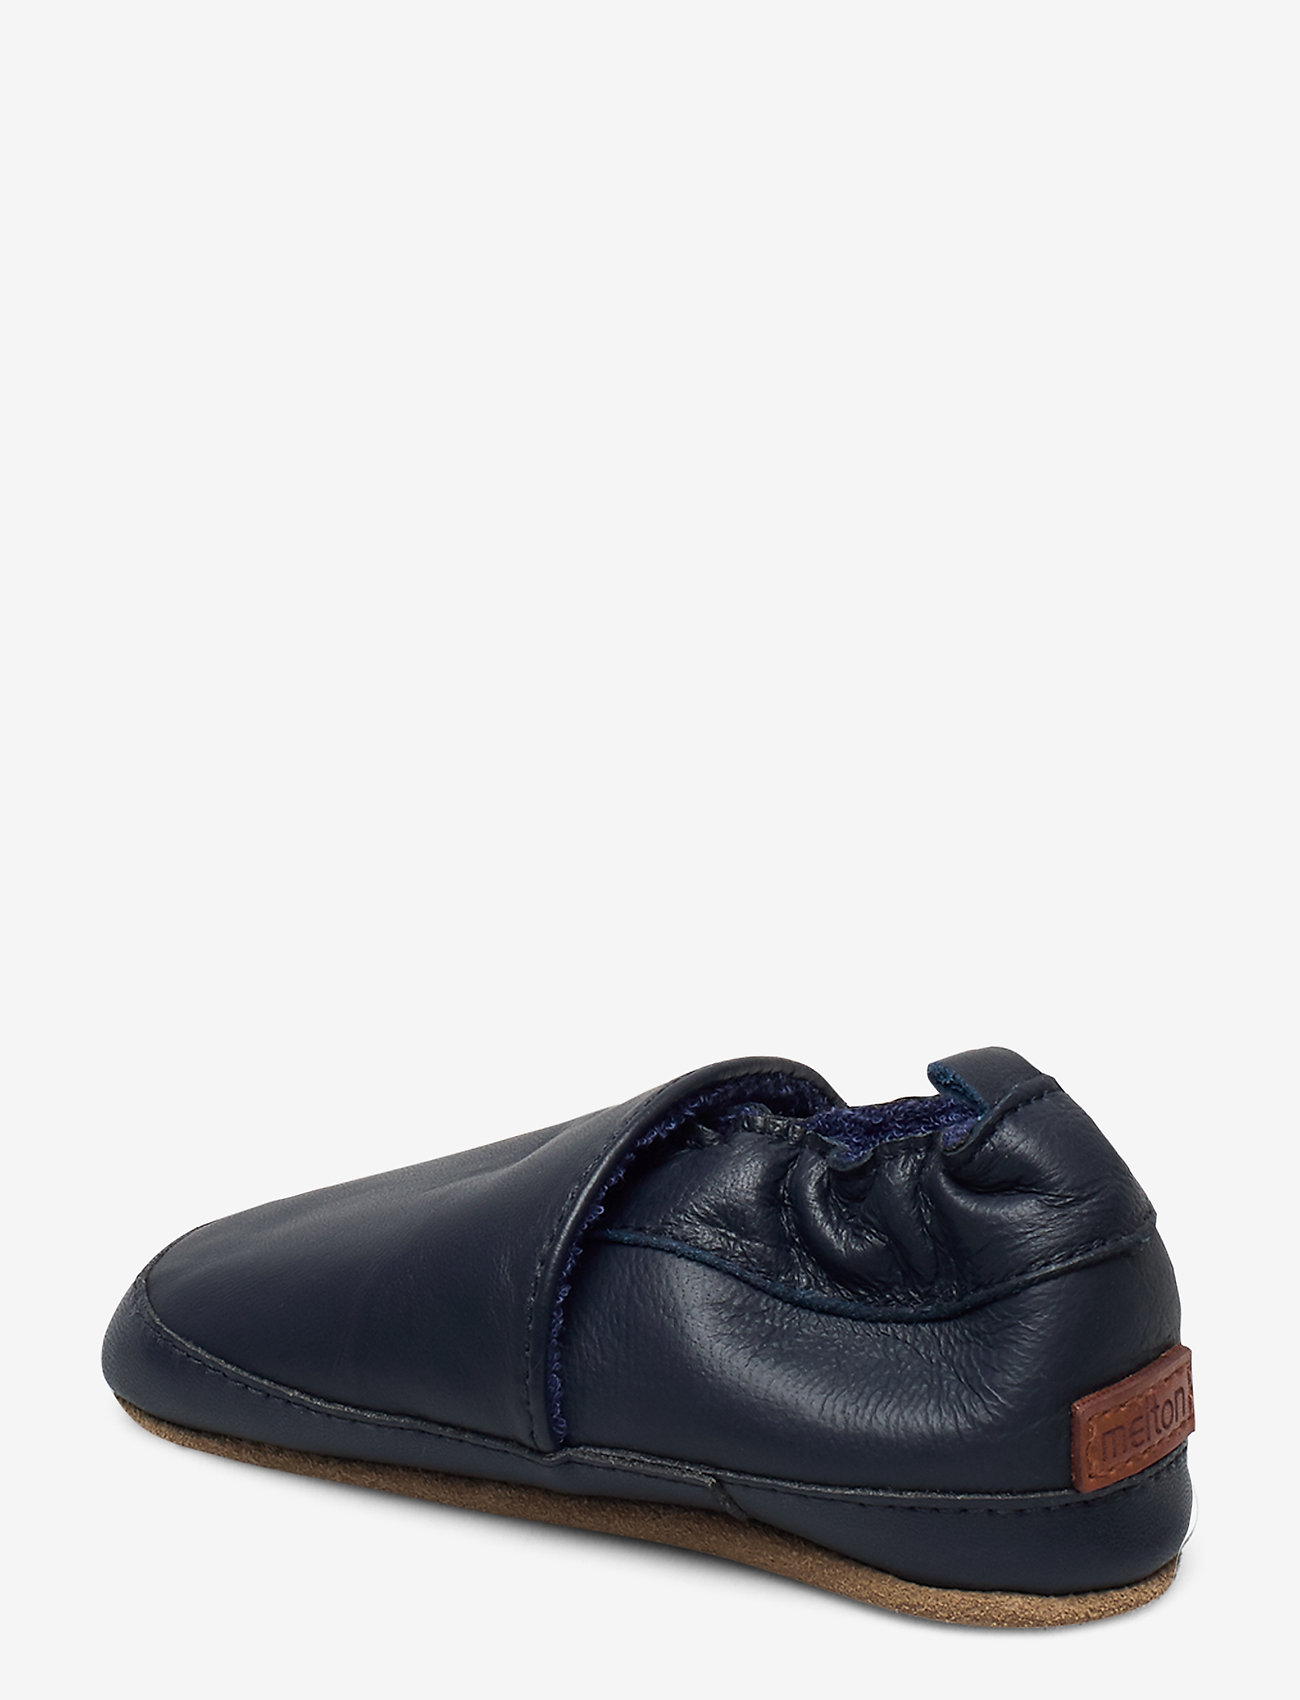 Melton - Leather shoe - Loafer - lowest prices - 287/bluenights - 1